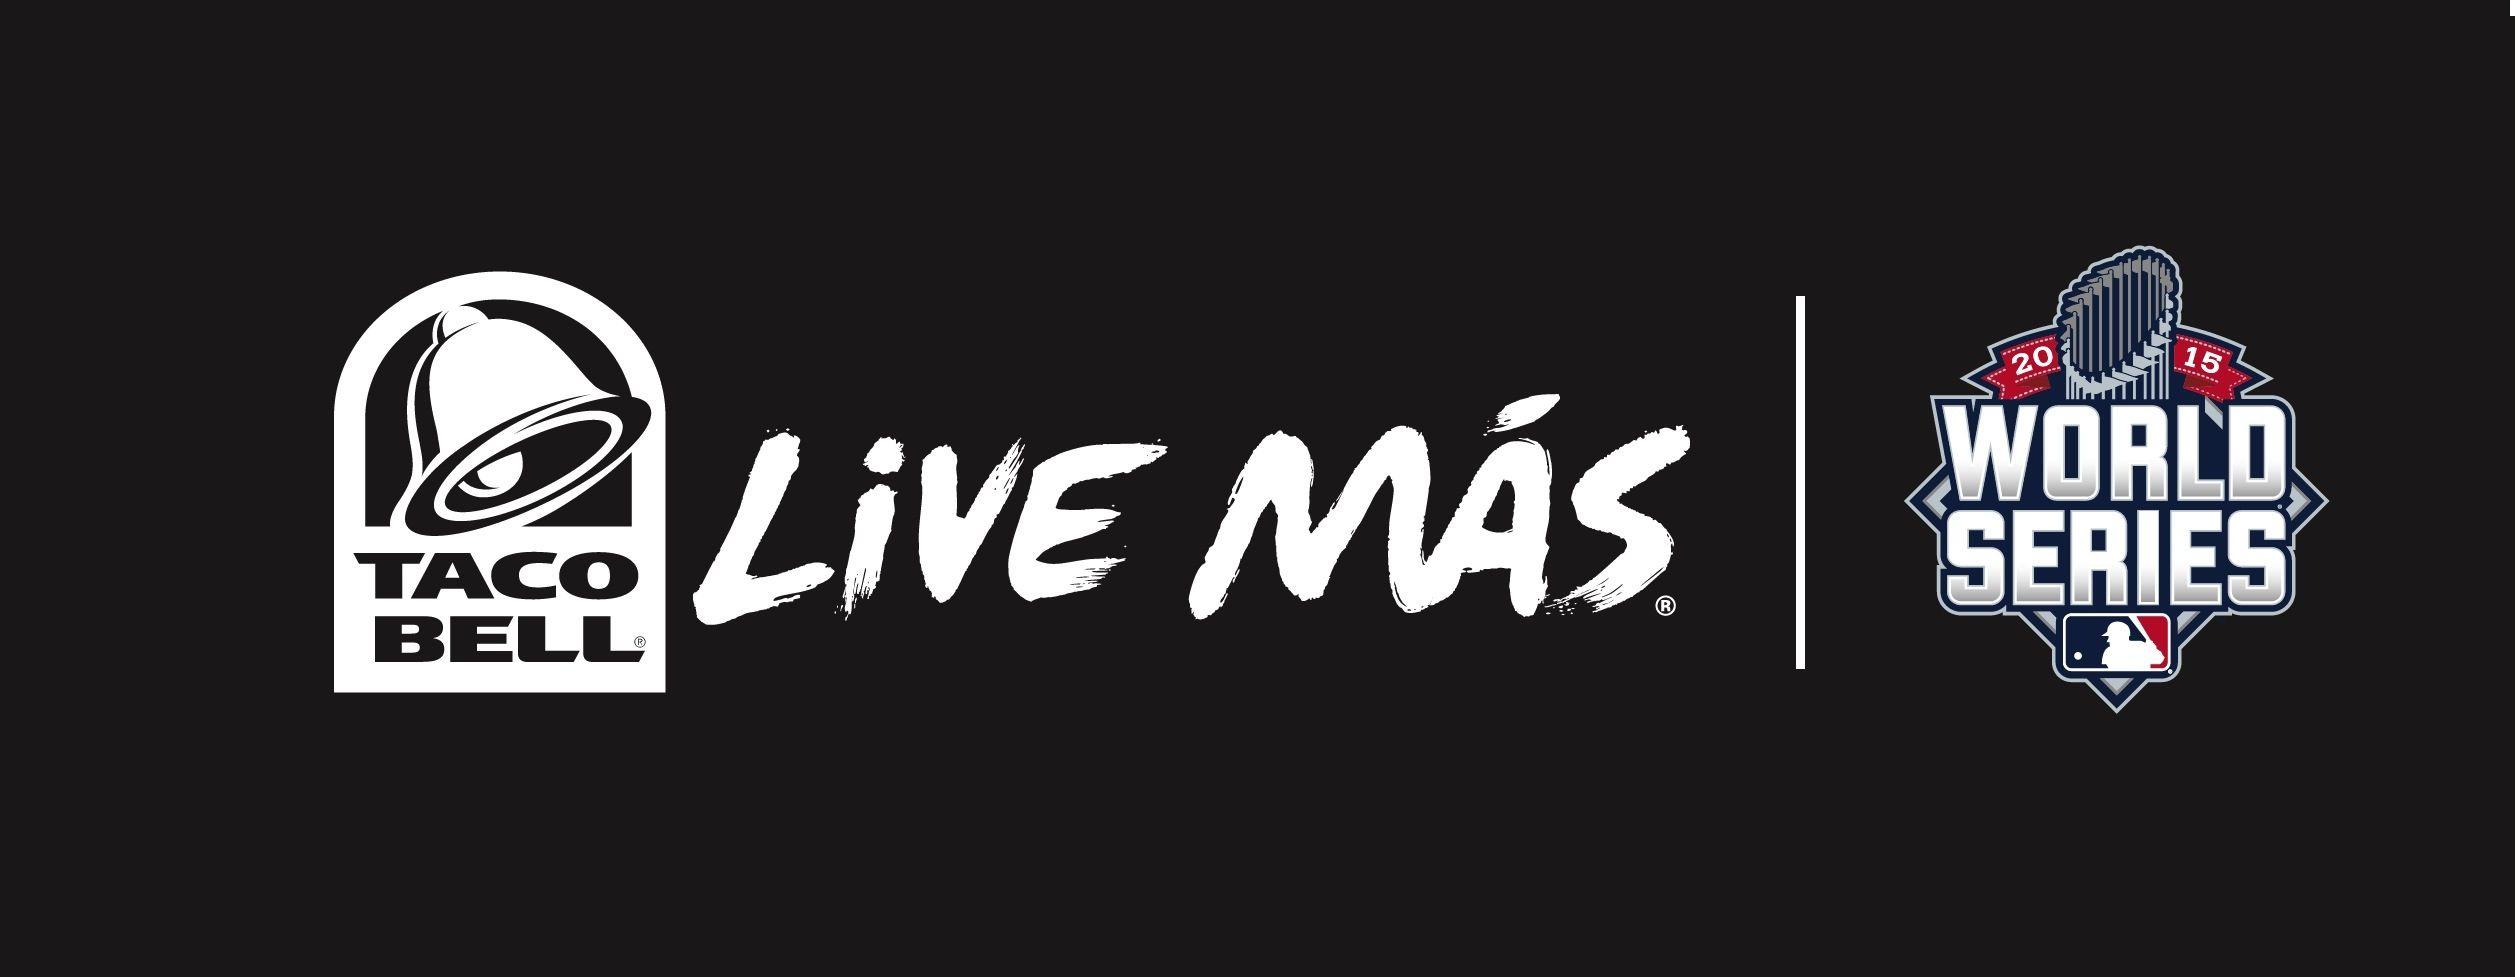 Taco Bell Live Mas Logo - First Player to Steal a Base During the World Series Will Earn ...